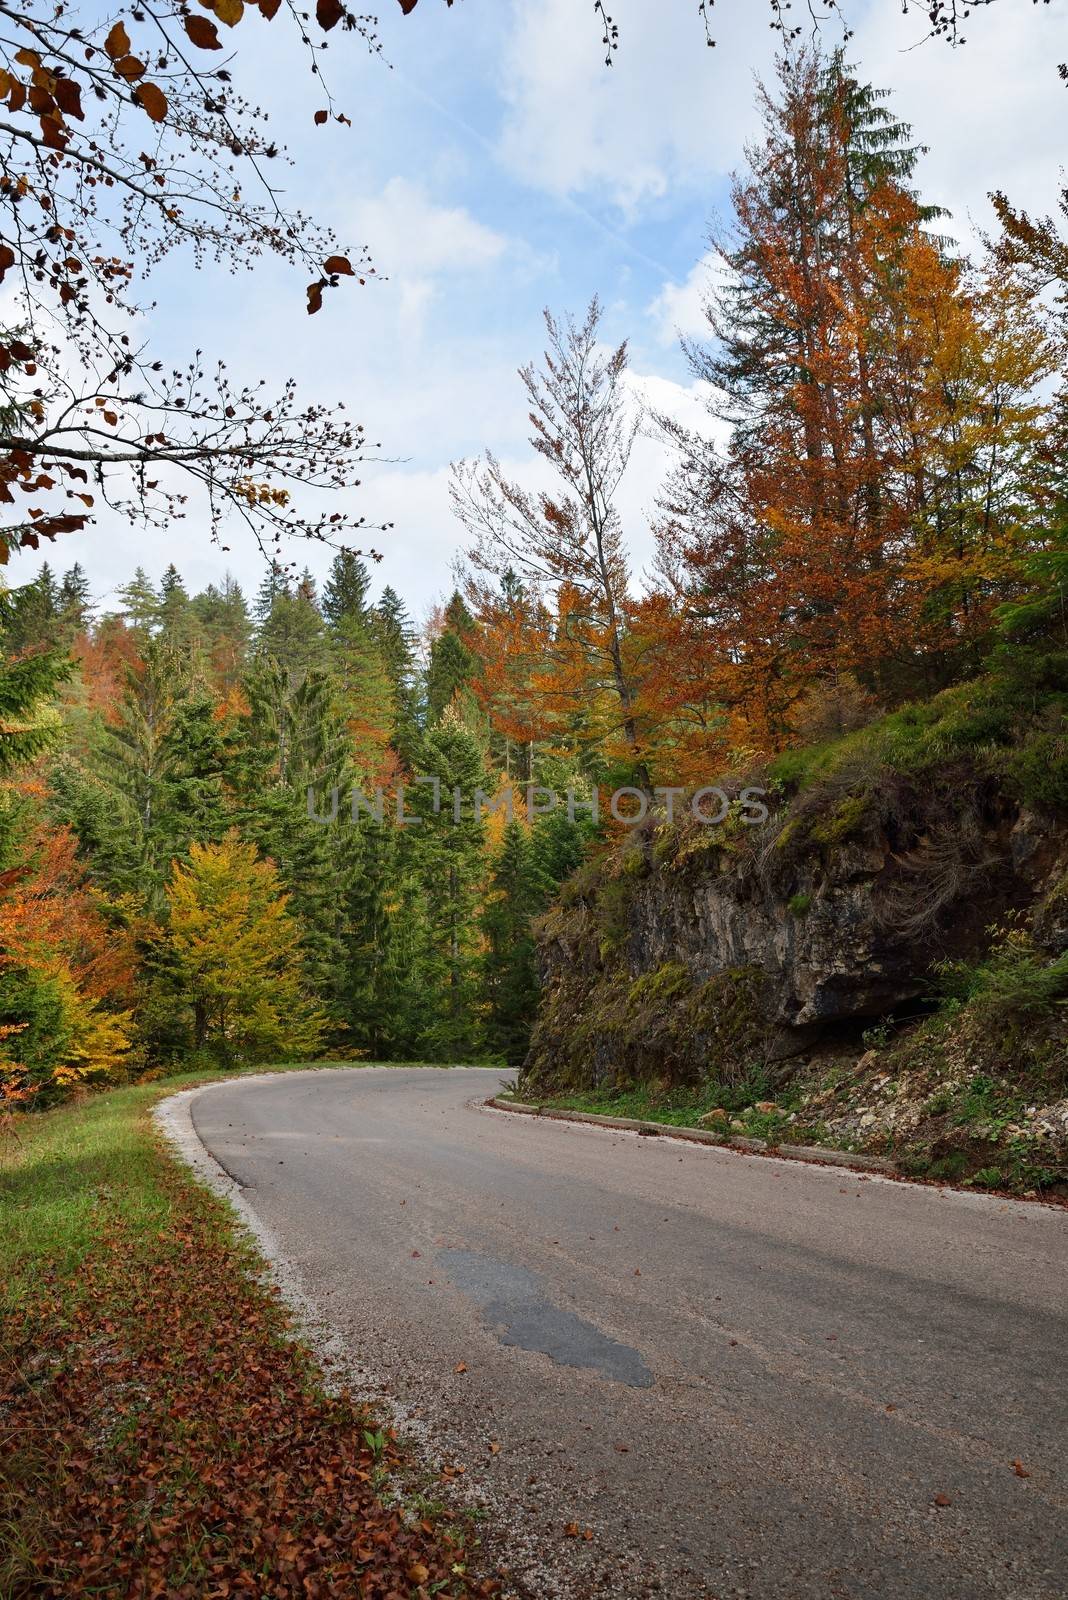 Road in Autumn Forest by zagart36